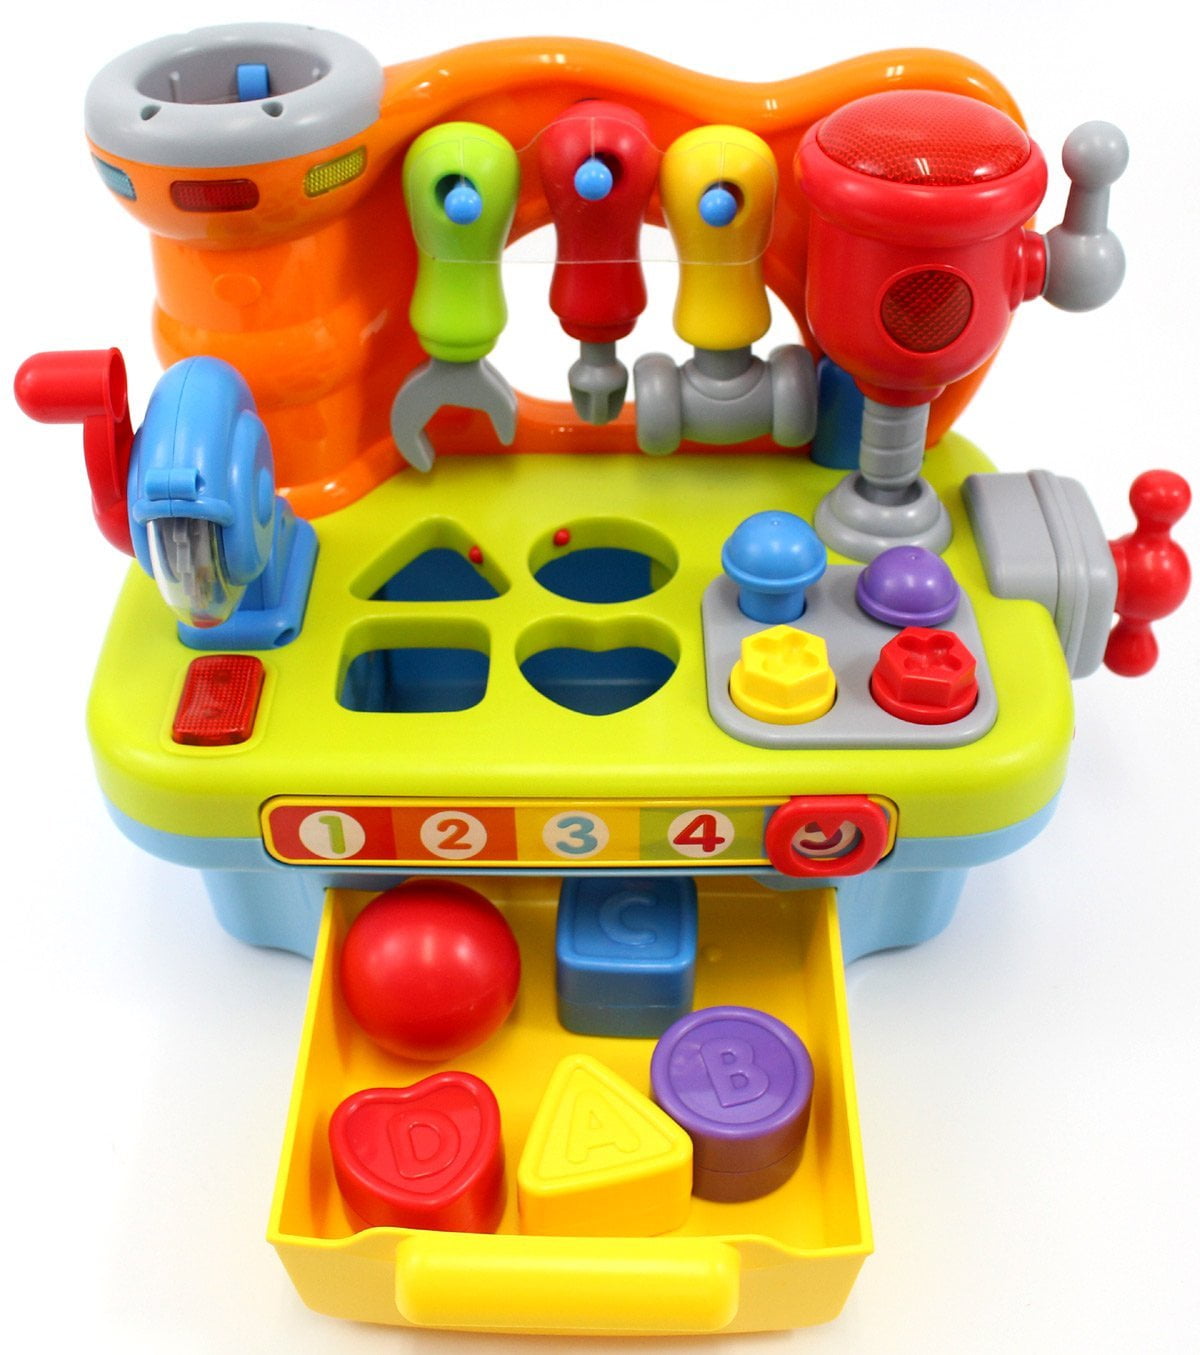 Yiosion Musical Learning Tool Workbench Work Bench Toy Activity Center for Kids with Shape Sorter 